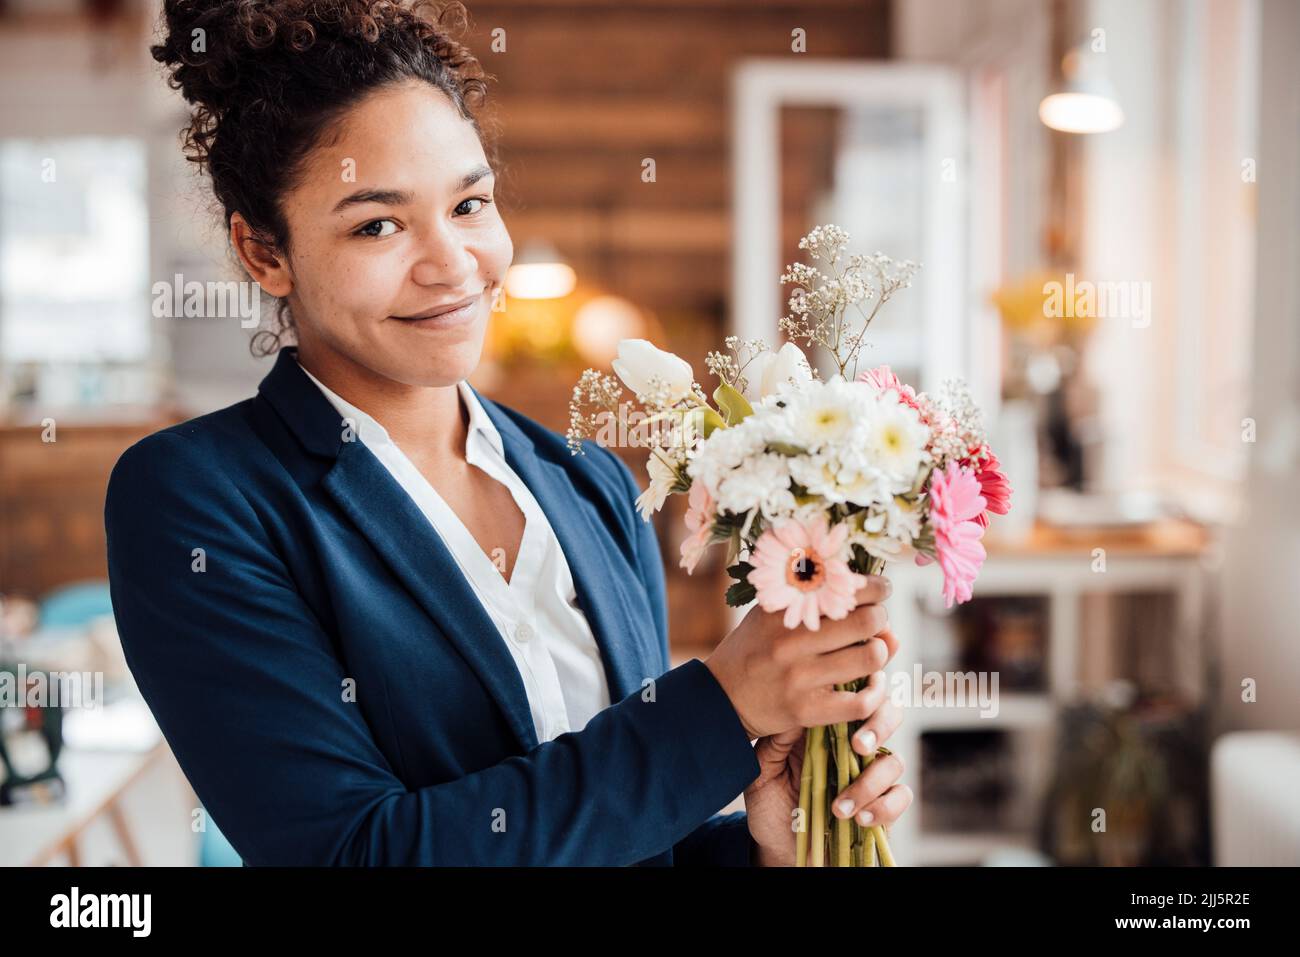 Smiling young businesswoman with flowers in office Stock Photo